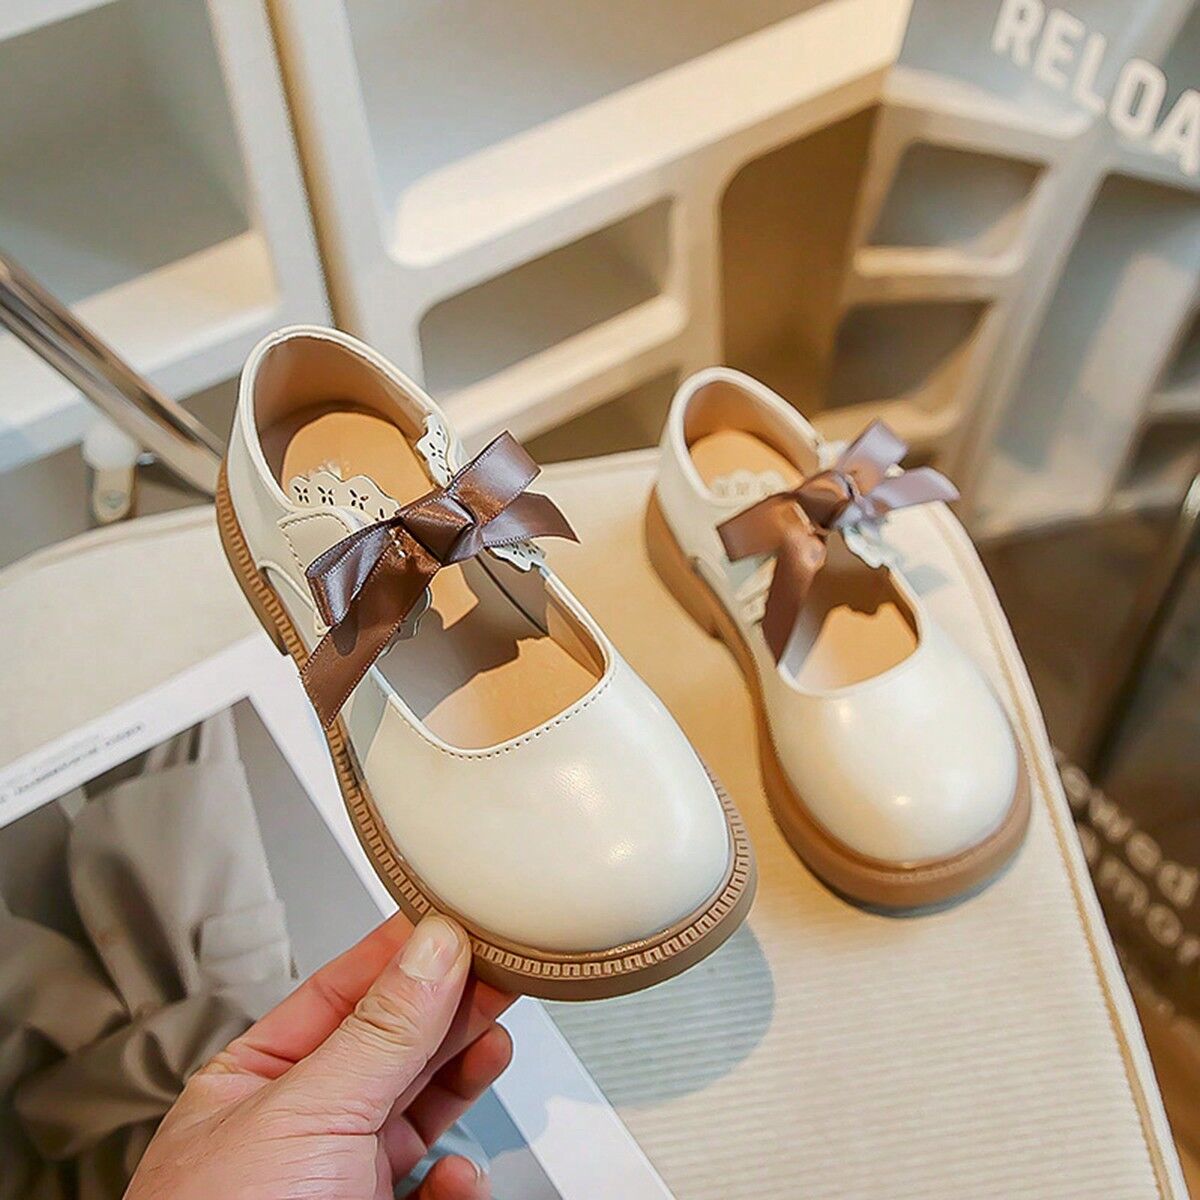 SHEIN Children's Spring New Pu Leather Princess Shoes For Girls, Non-Slip Beige Color Shoes For Little Girl, All-Match Casual Shoes Beige EUR34,EUR35,EUR36,EUR26,EUR27,EUR28,EUR29,EUR30,EUR31,EUR32,EUR33